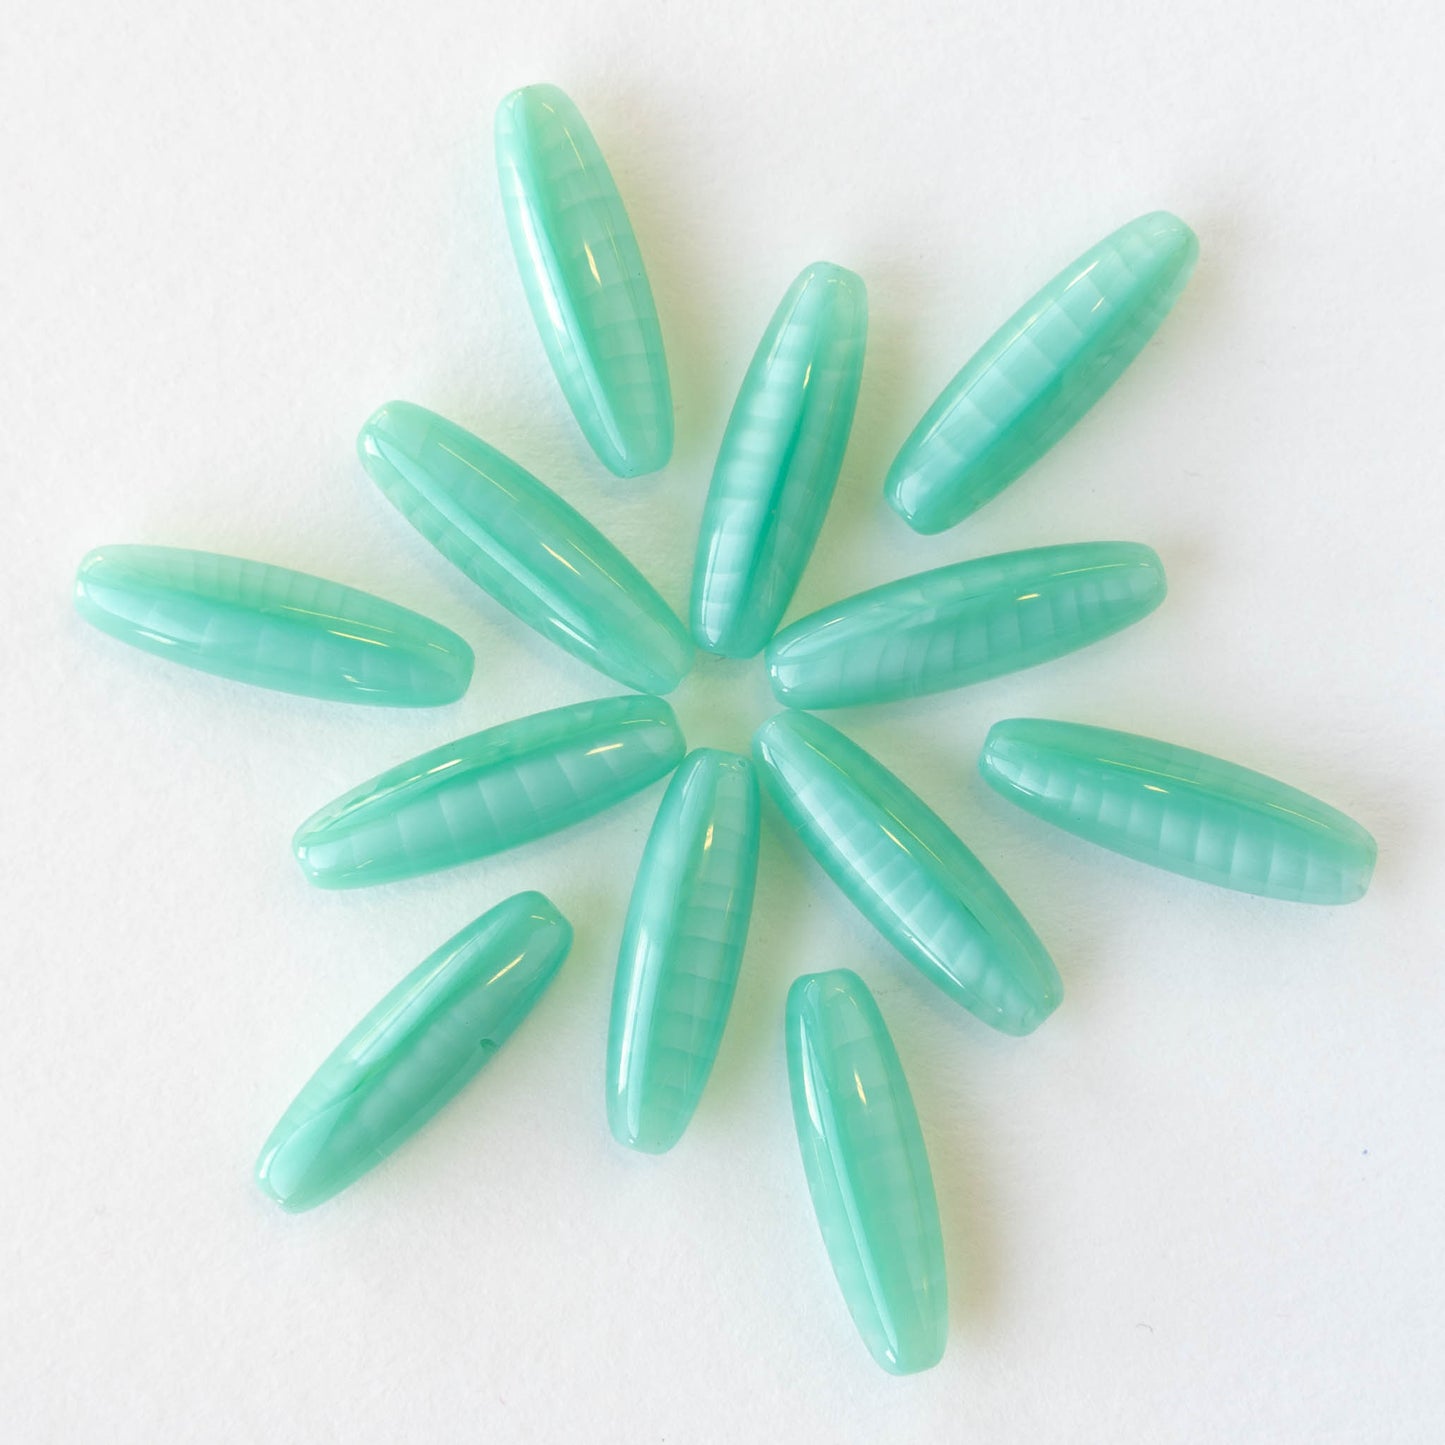 Tapered Tube Beads - Seafoam Green - Choose Size